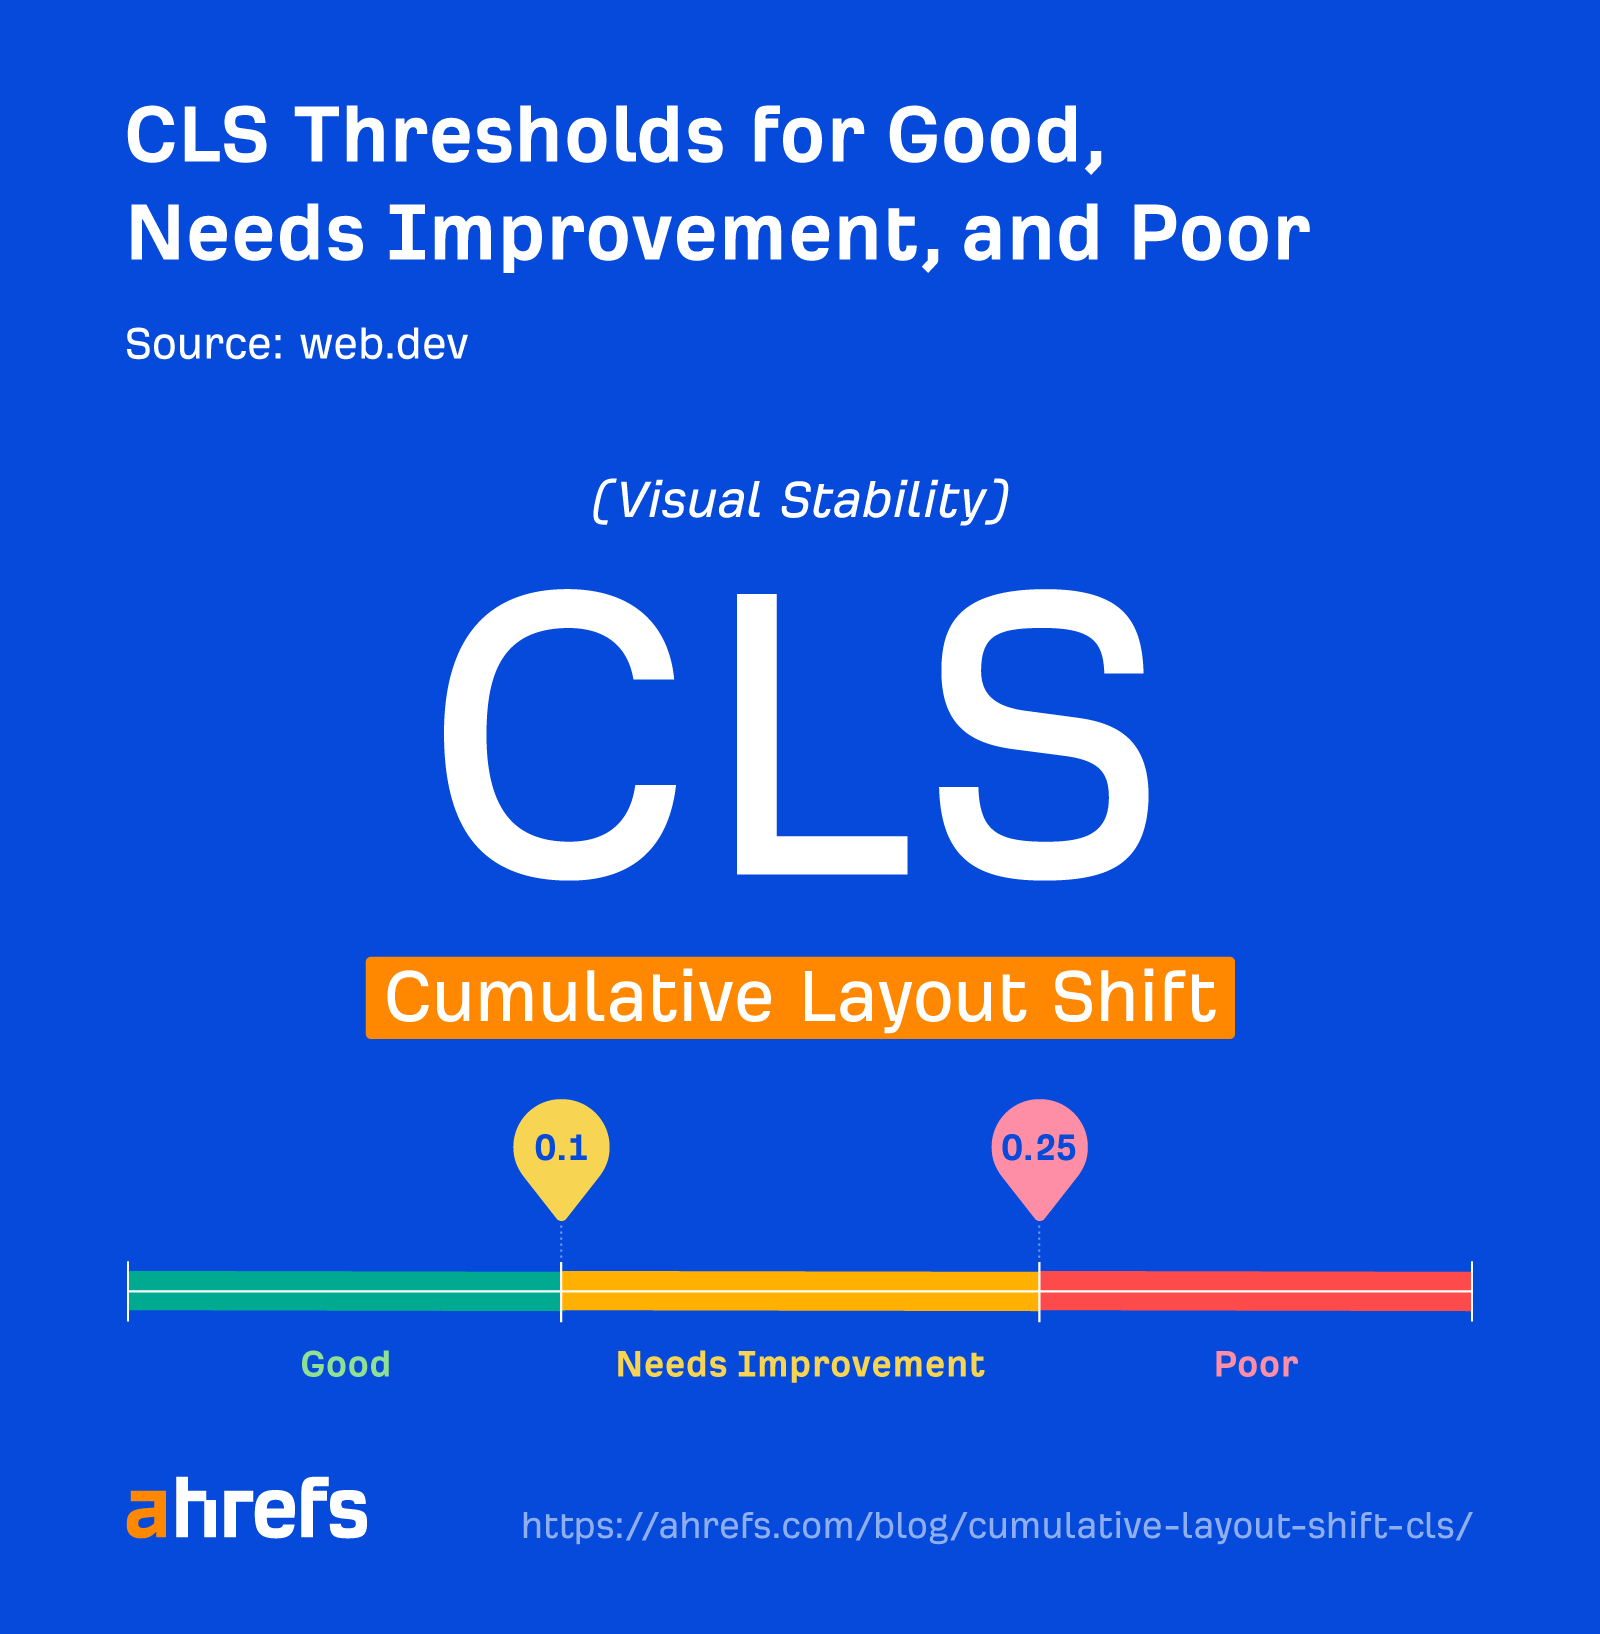 CLS thresholds for good, needs improvement, and poor